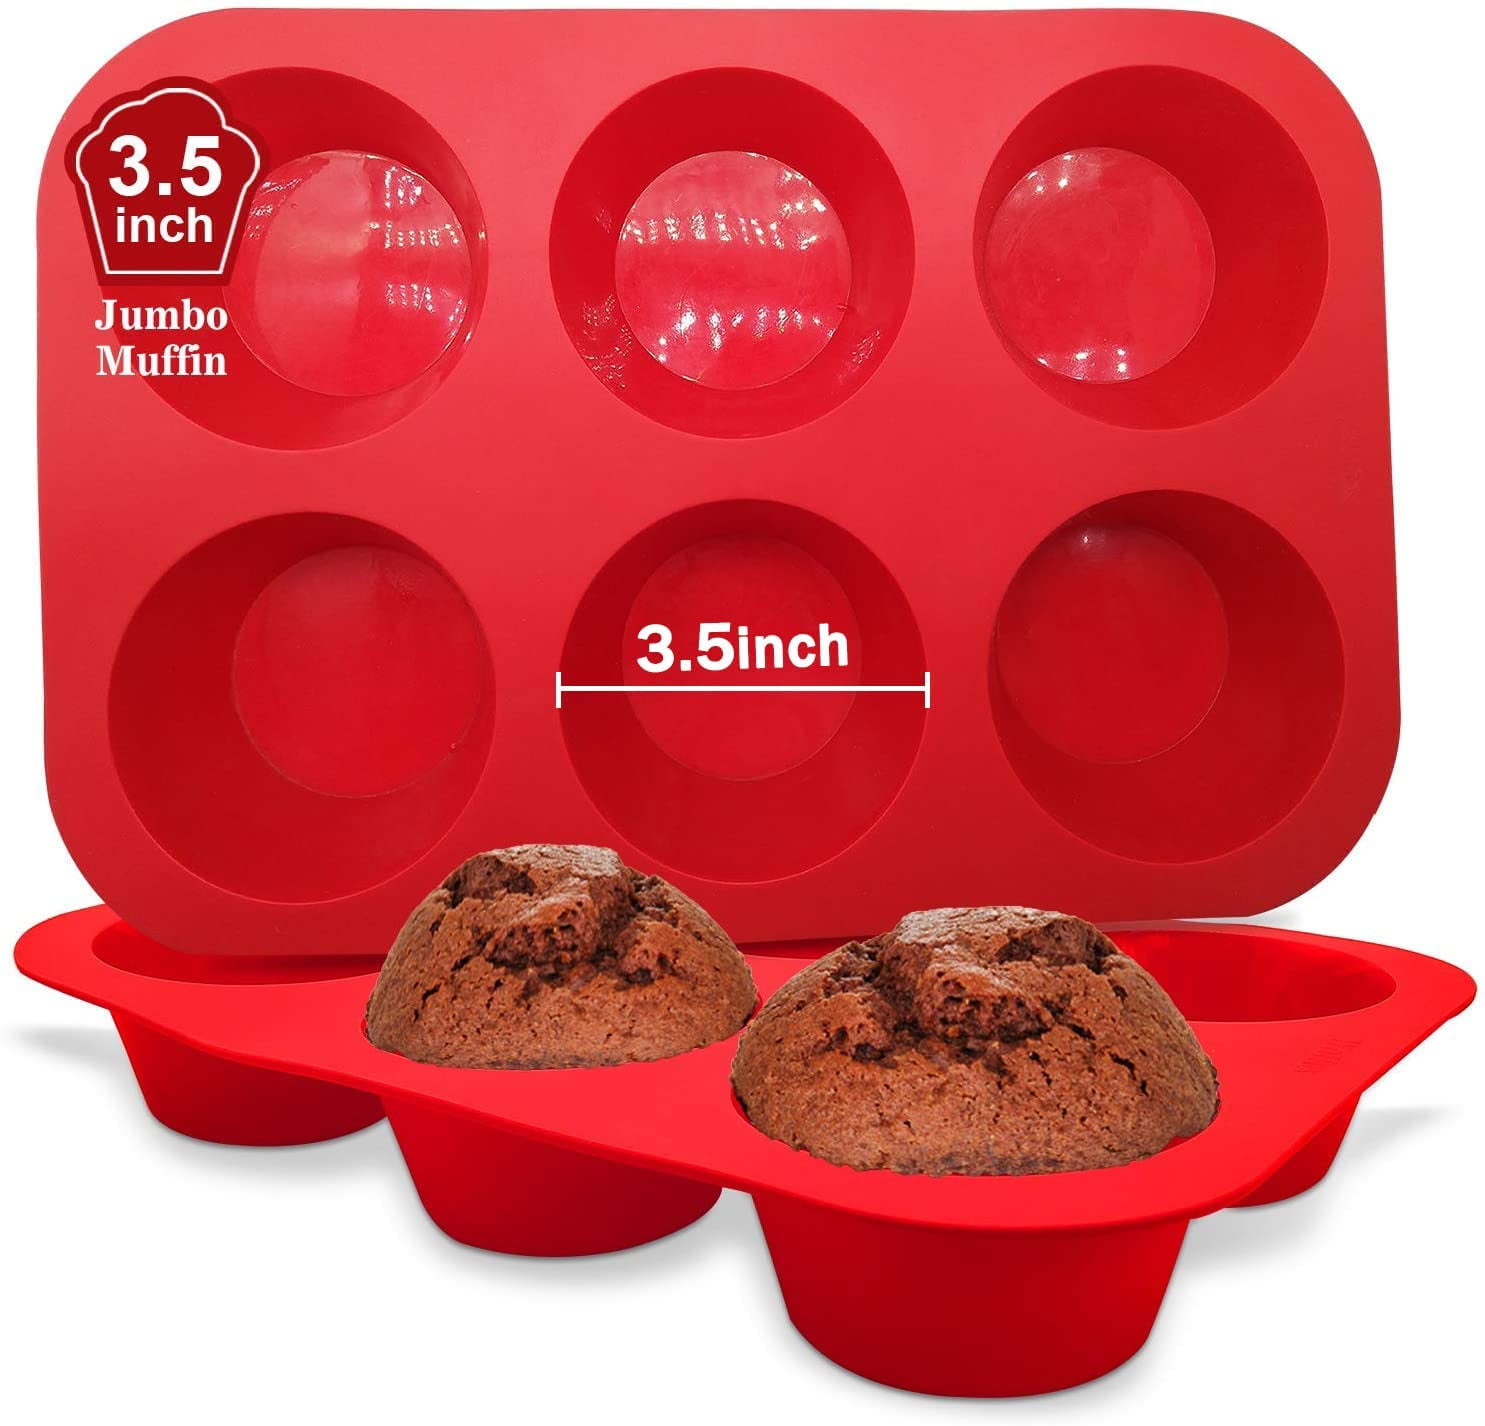 SILIVO Silicone Jumbo Muffin Pans Nonstick 6 Cup(2 Pack) - 3.5 inch Large  Cupcake Pan - Silicone Baking Molds for Homemade Muffins and Cupcakes - 6